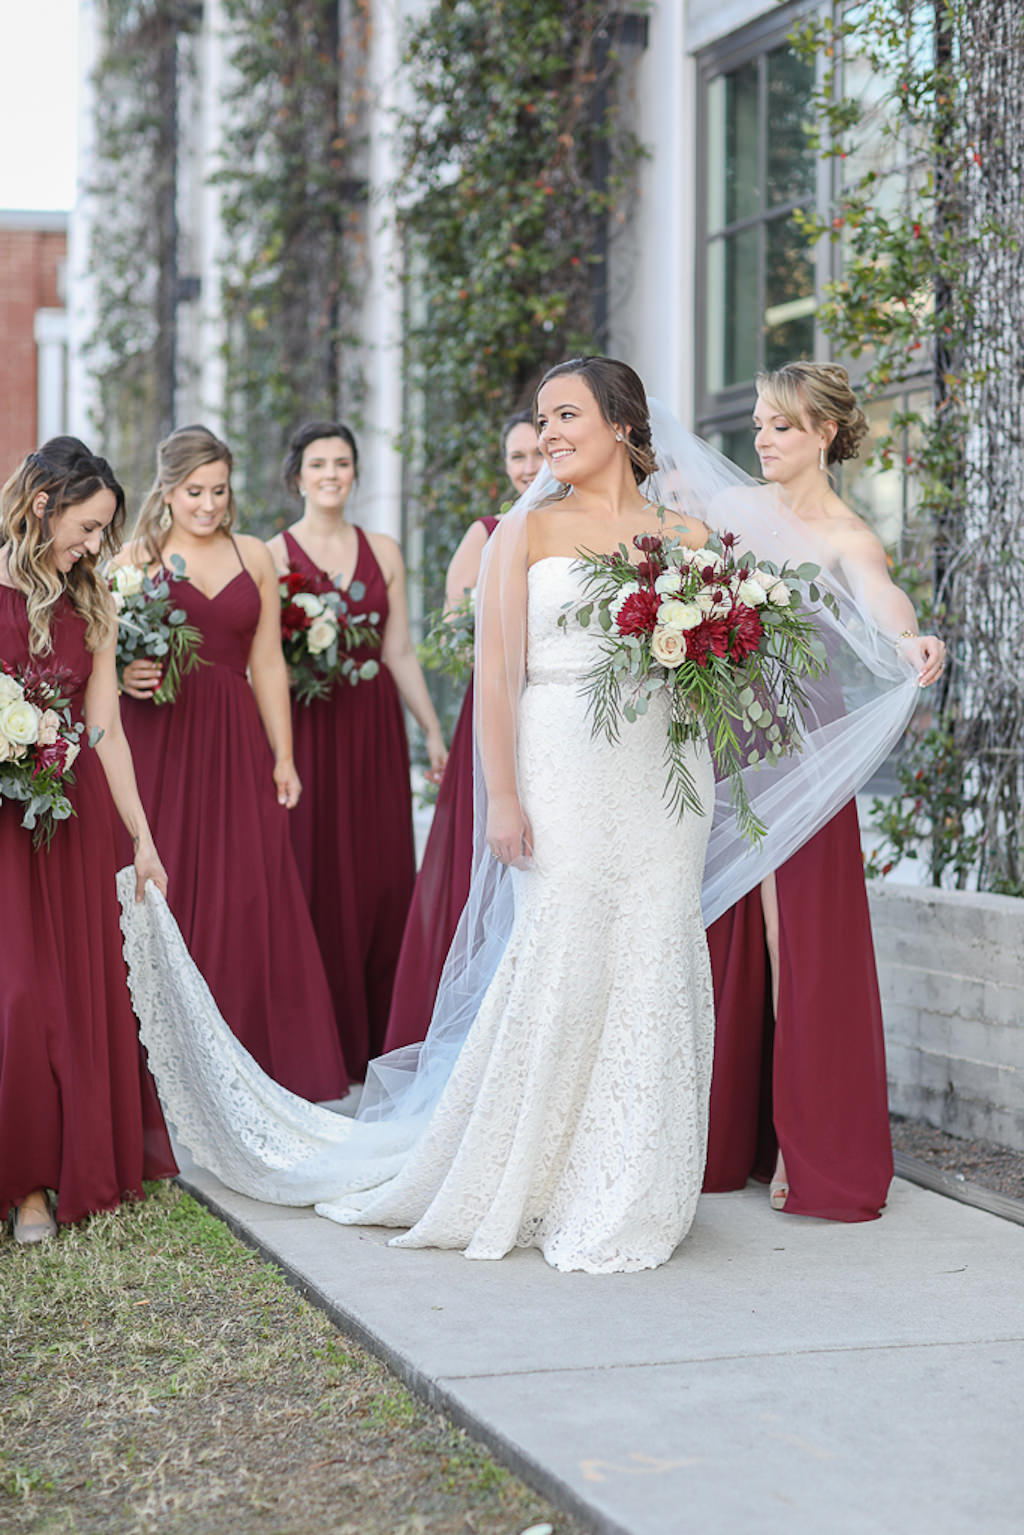 Bride in Strapless Lace and Fitted Wedding Dress with Rhinestone Belt and Cathedral Length Veil and Bridesmaids in Long Burgundy Wine Red Dresses Holding Garden Style Red, Ivory, and Greenery Floral Bouquets | Tampa Bay Wedding Photographer Lifelong Photography Studios | Tampa Bay Wedding Planner Breezin' Weddings | Tampa Bay Wedding Hair and Makeup Team Michele Renee the Studio